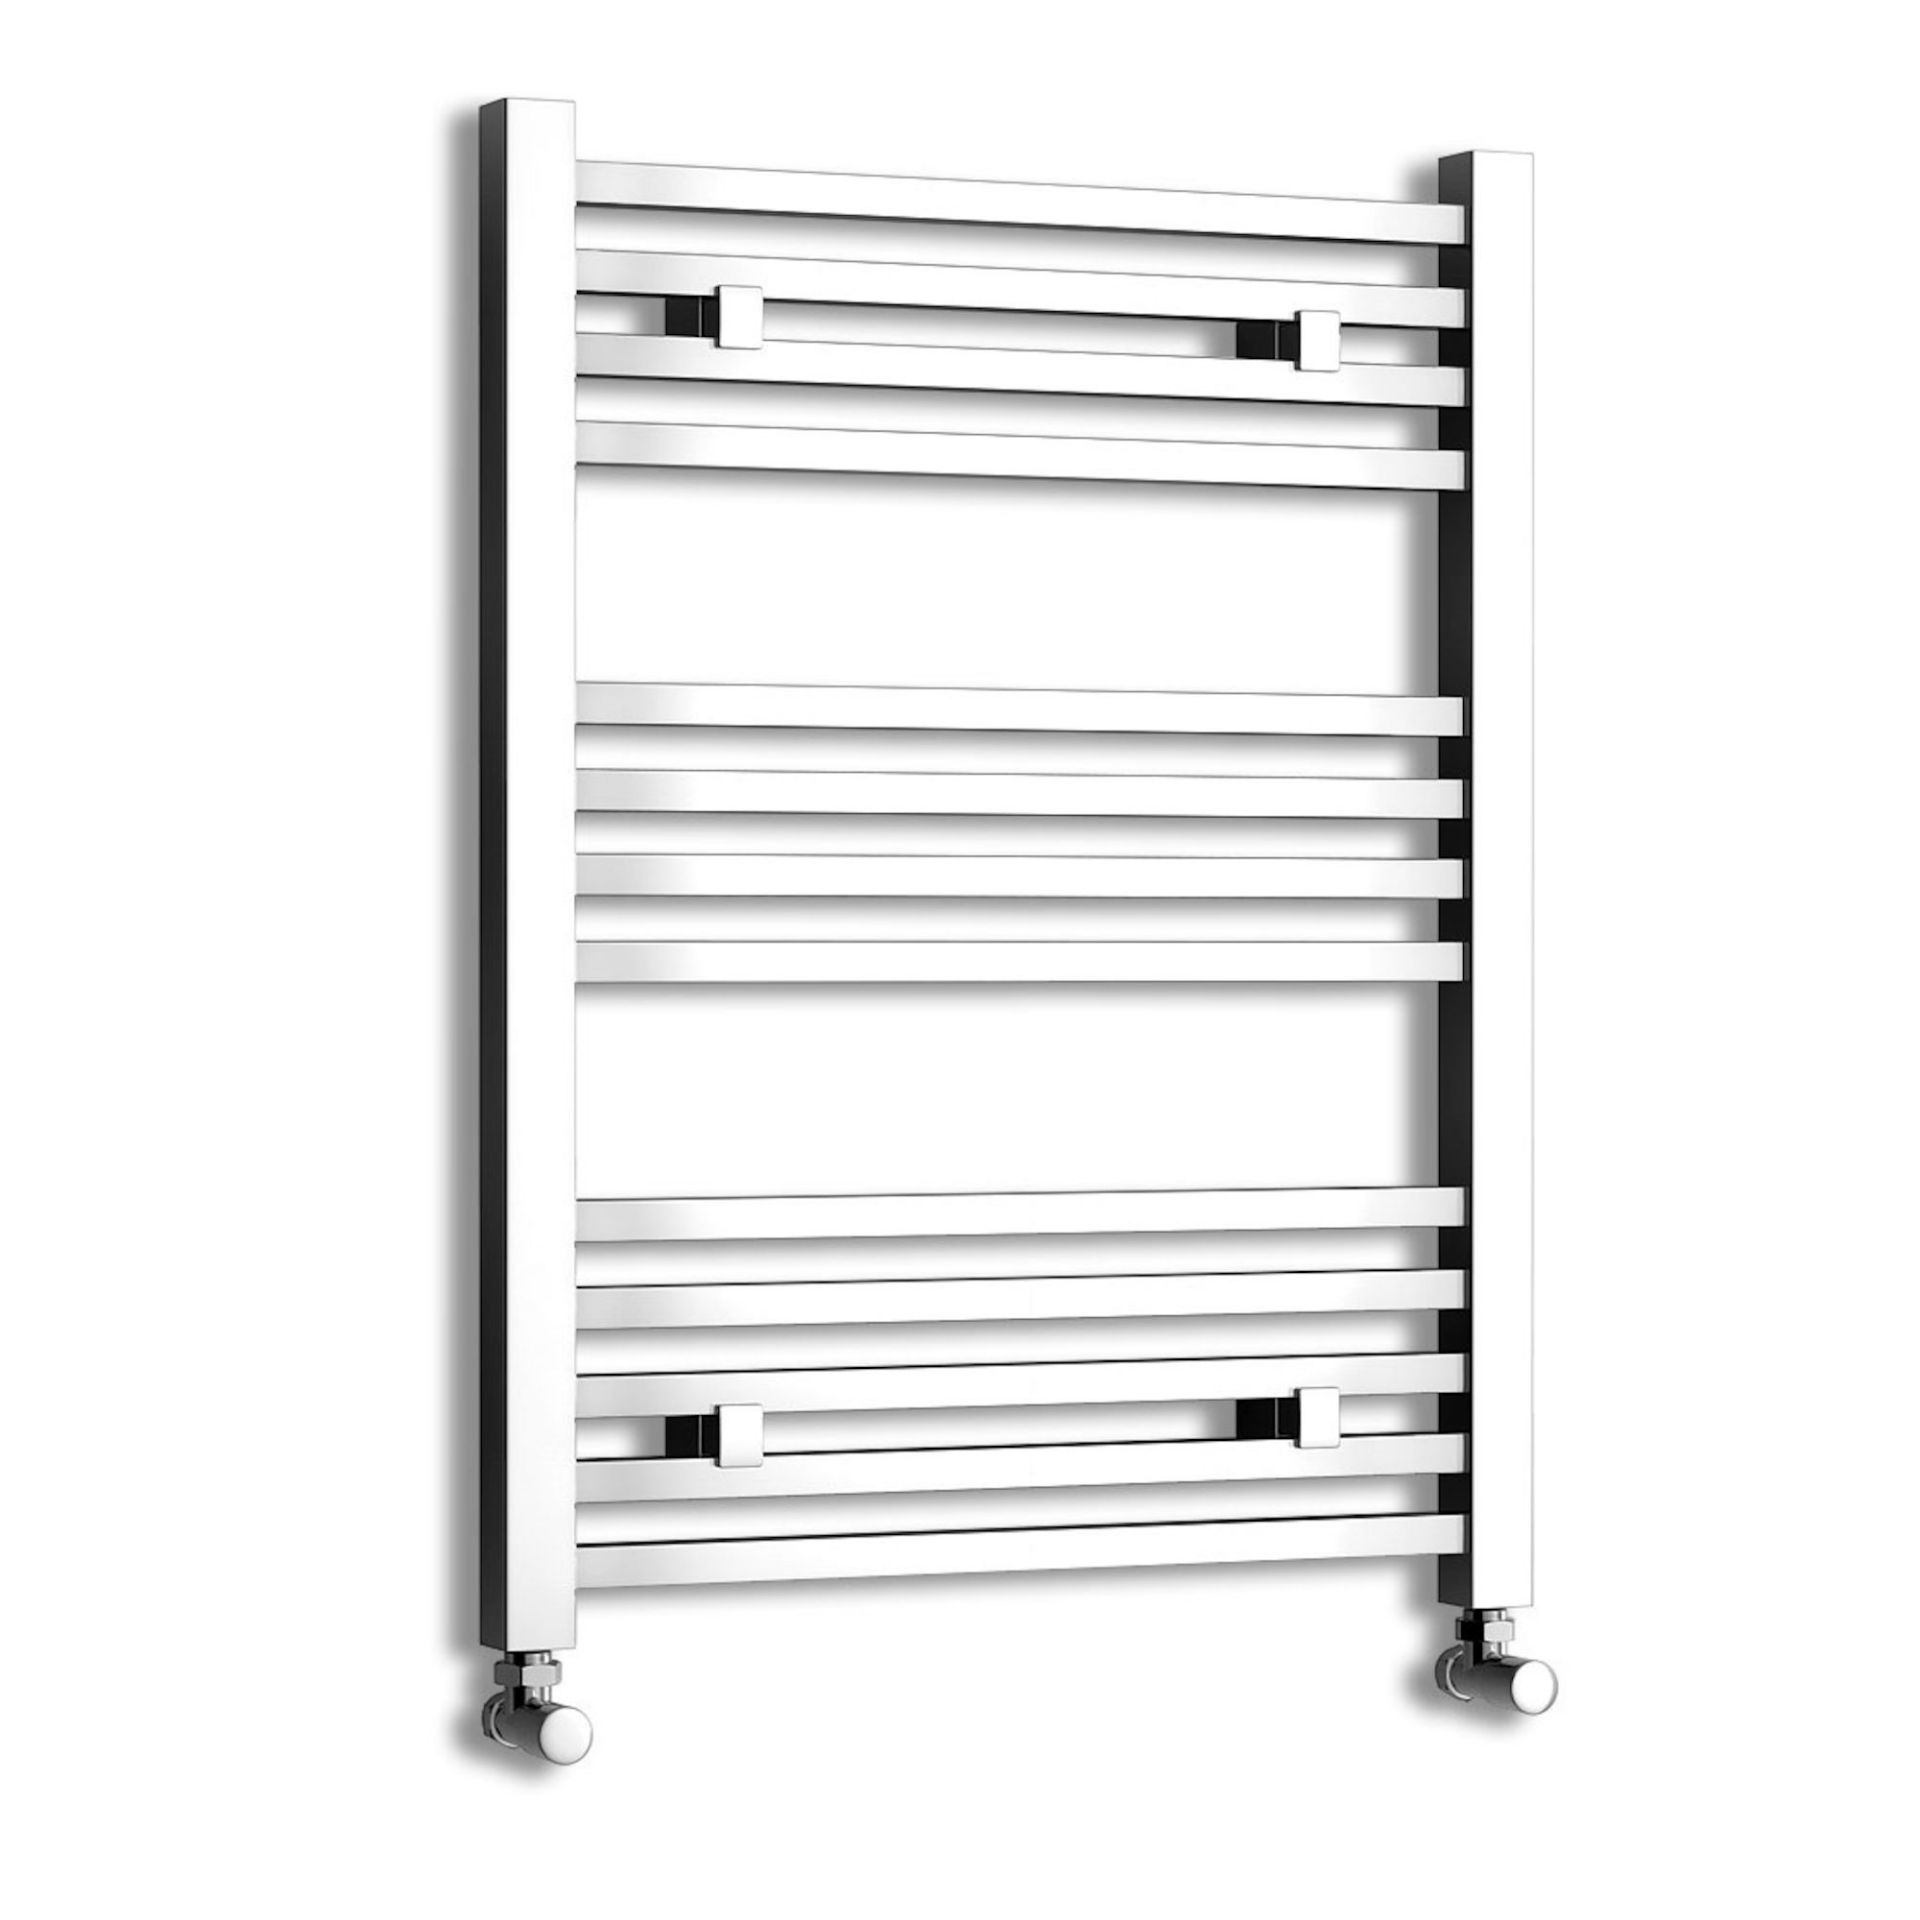 (MW108) 800x600mm Chrome Square Rail Ladder Towel Radiator. Made from low carbon steel with a high - Bild 3 aus 3